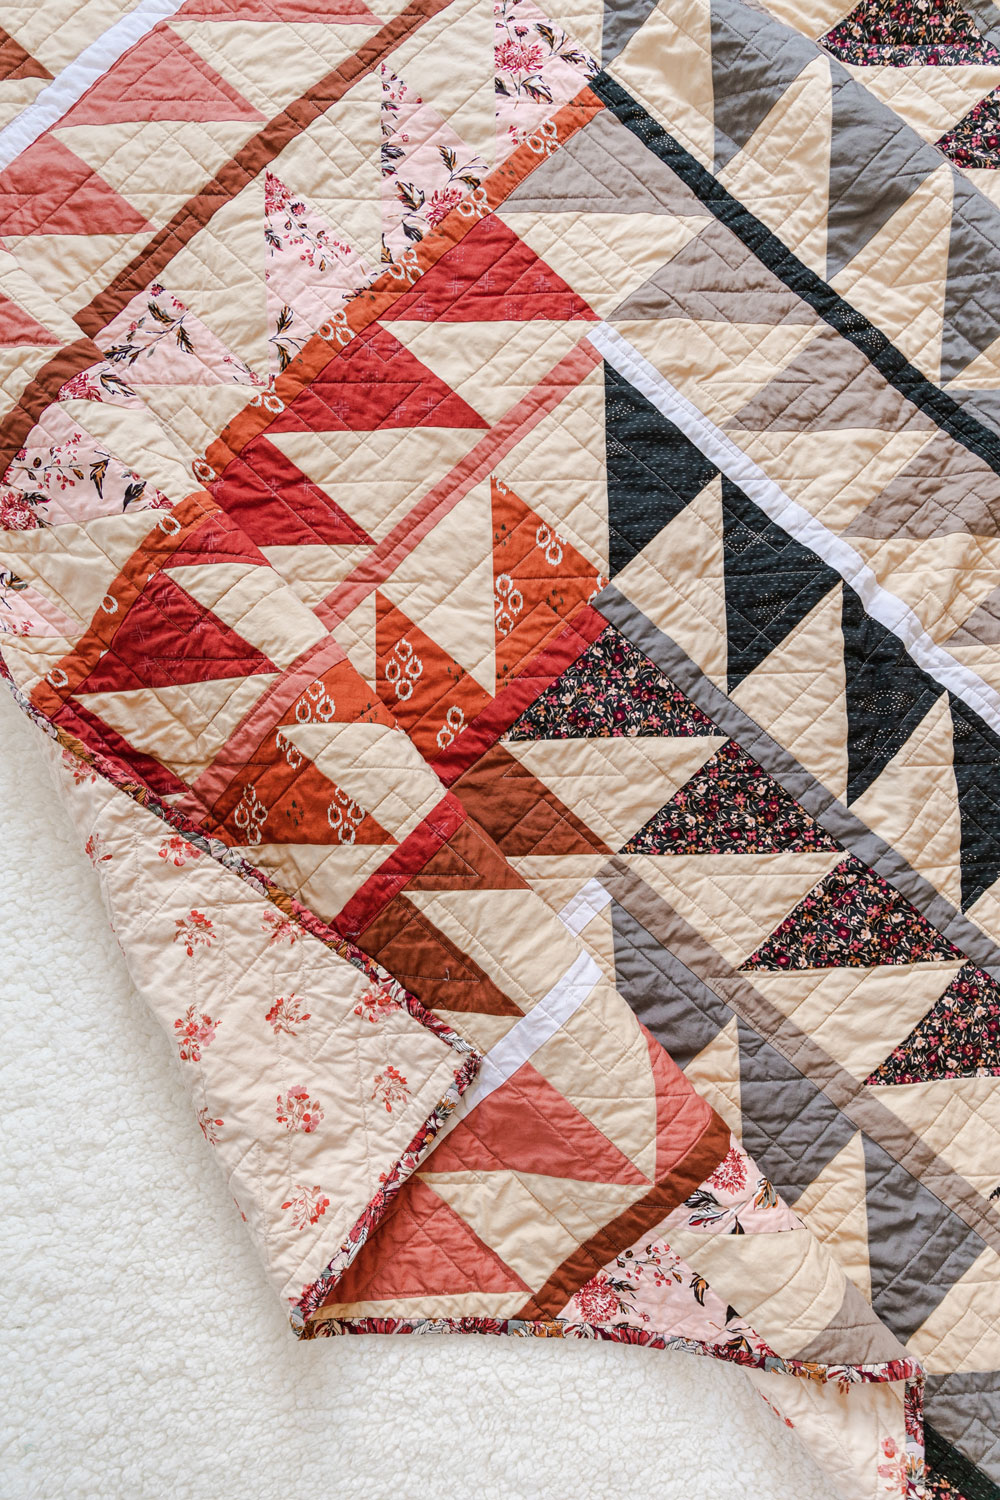 Join a fun sew along! It is easy to participate – all you need is the Gather quilt pattern so we make this quilt together! suzyquilts.com #quiltpattern #textiledesign